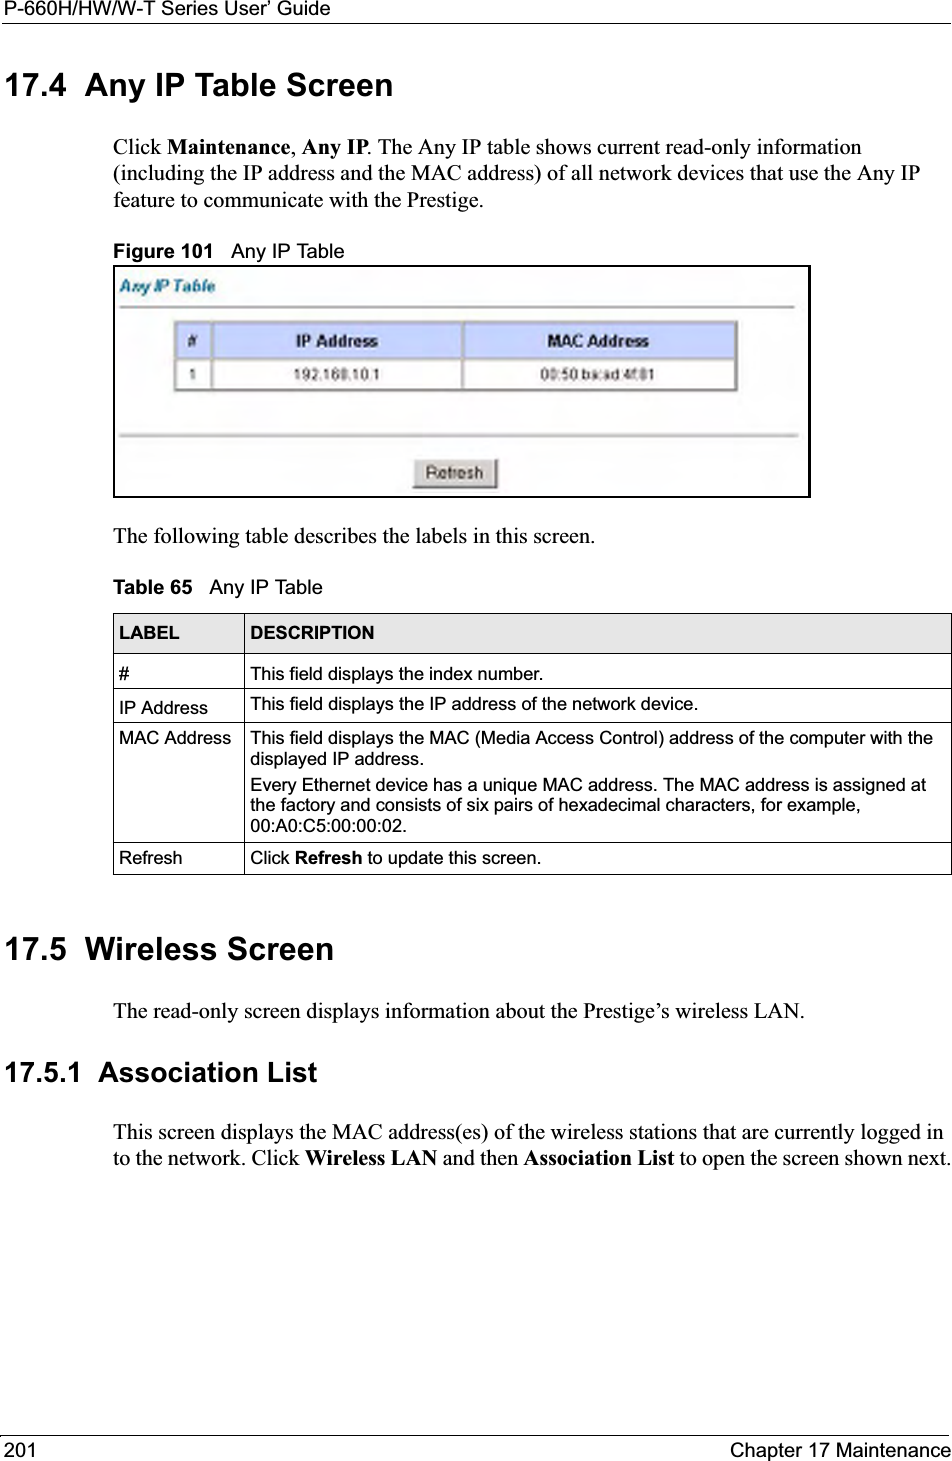 P-660H/HW/W-T Series User’ Guide201 Chapter 17 Maintenance17.4  Any IP Table Screen Click Maintenance,Any IP. The Any IP table shows current read-only information (including the IP address and the MAC address) of all network devices that use the Any IP feature to communicate with the Prestige. Figure 101   Any IP TableThe following table describes the labels in this screen.  17.5  Wireless Screen The read-only screen displays information about the Prestige’s wireless LAN.17.5.1  Association List This screen displays the MAC address(es) of the wireless stations that are currently logged in to the network. Click Wireless LAN and then Association List to open the screen shown next.Table 65   Any IP TableLABEL DESCRIPTION#This field displays the index number. IP Address This field displays the IP address of the network device. MAC Address This field displays the MAC (Media Access Control) address of the computer with the displayed IP address.Every Ethernet device has a unique MAC address. The MAC address is assigned at the factory and consists of six pairs of hexadecimal characters, for example, 00:A0:C5:00:00:02.Refresh Click Refresh to update this screen. 